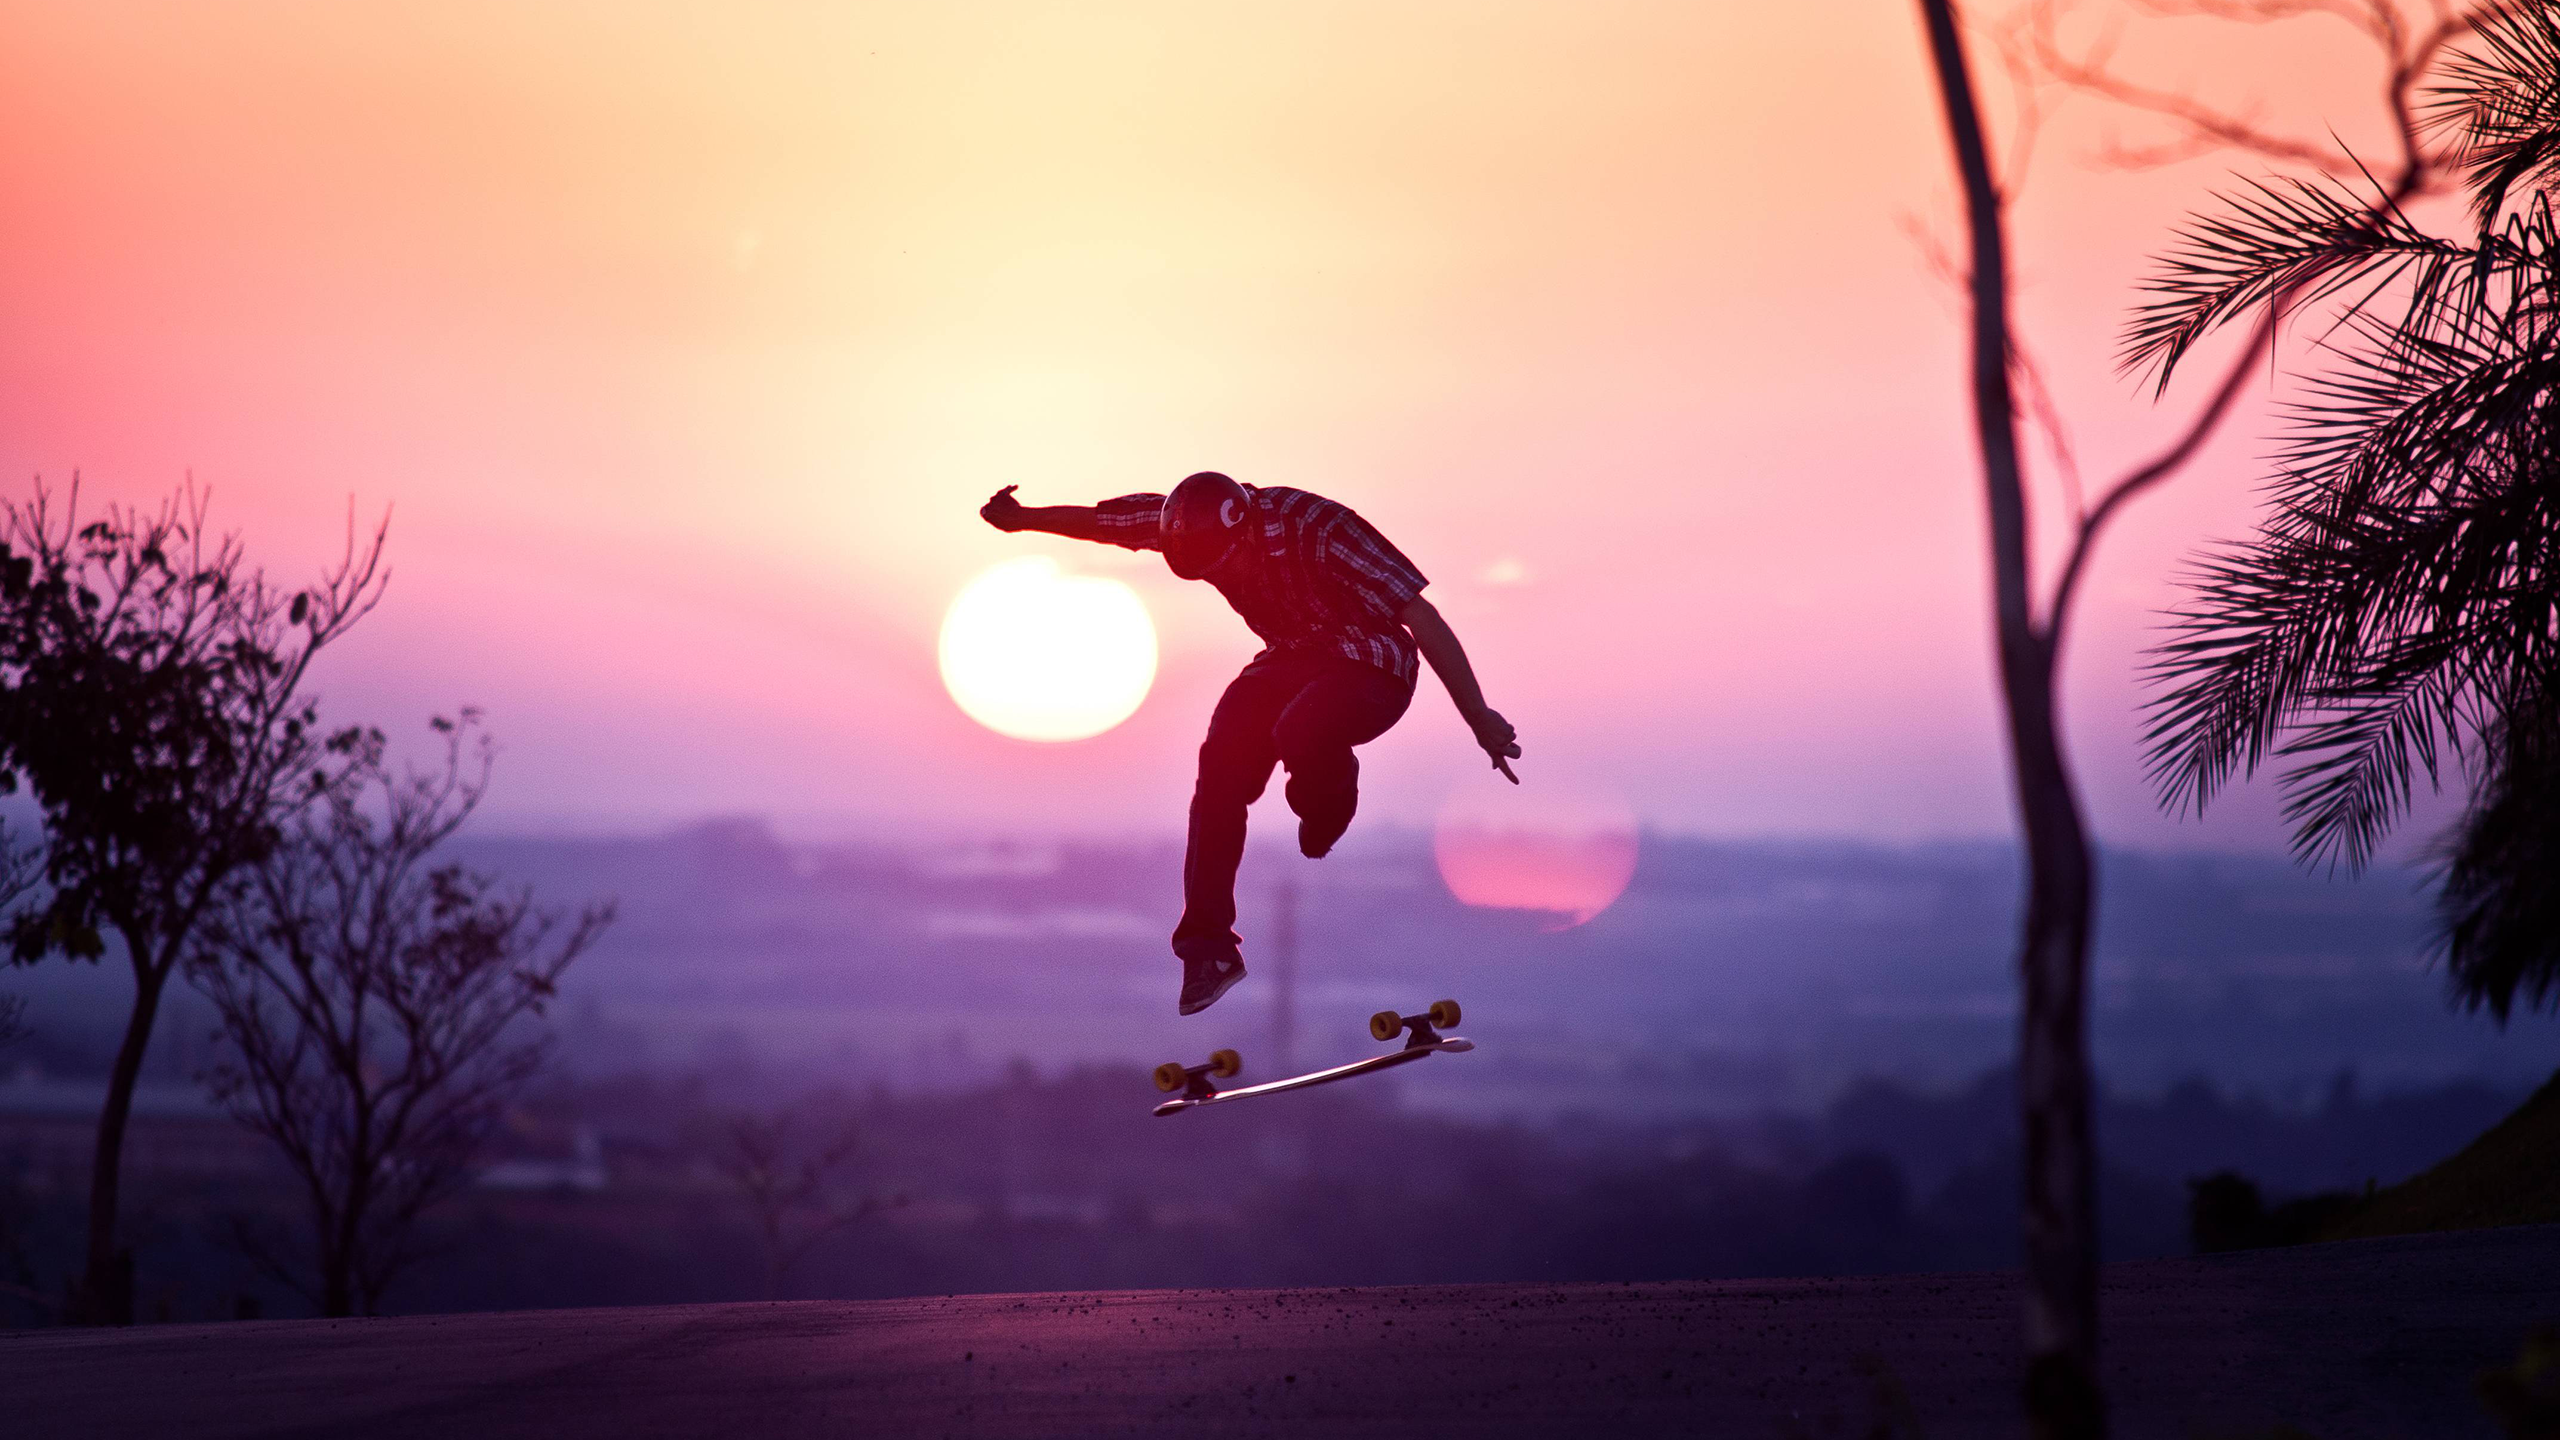 Skateboarding hd papers and backgrounds